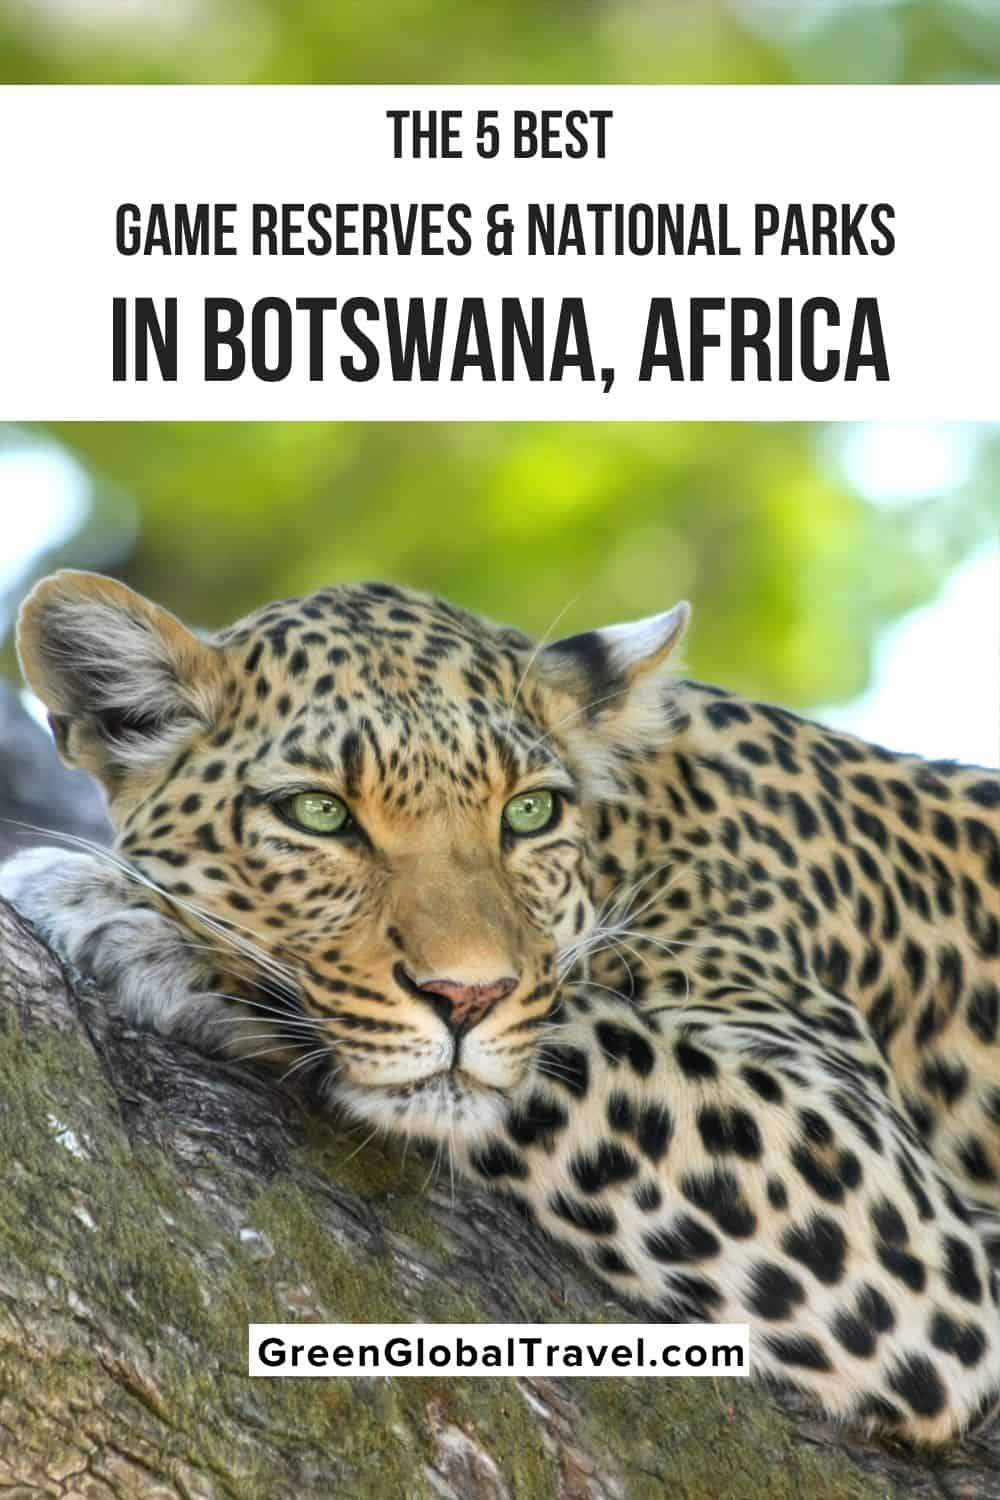 A look at why the conservation of Botswana wildlife has been successful, and the best Botswana Game Reserves and National Parks to visit. | botswana animal | animals in botswana | animals of botswana | wildlife in botswana wildlife of botswana | botswana attractions | best botswana safaris | kalahari animals | botswana african safari | botswana wildlife safari | wildlife safari in botswana |botswana wildlife safaris